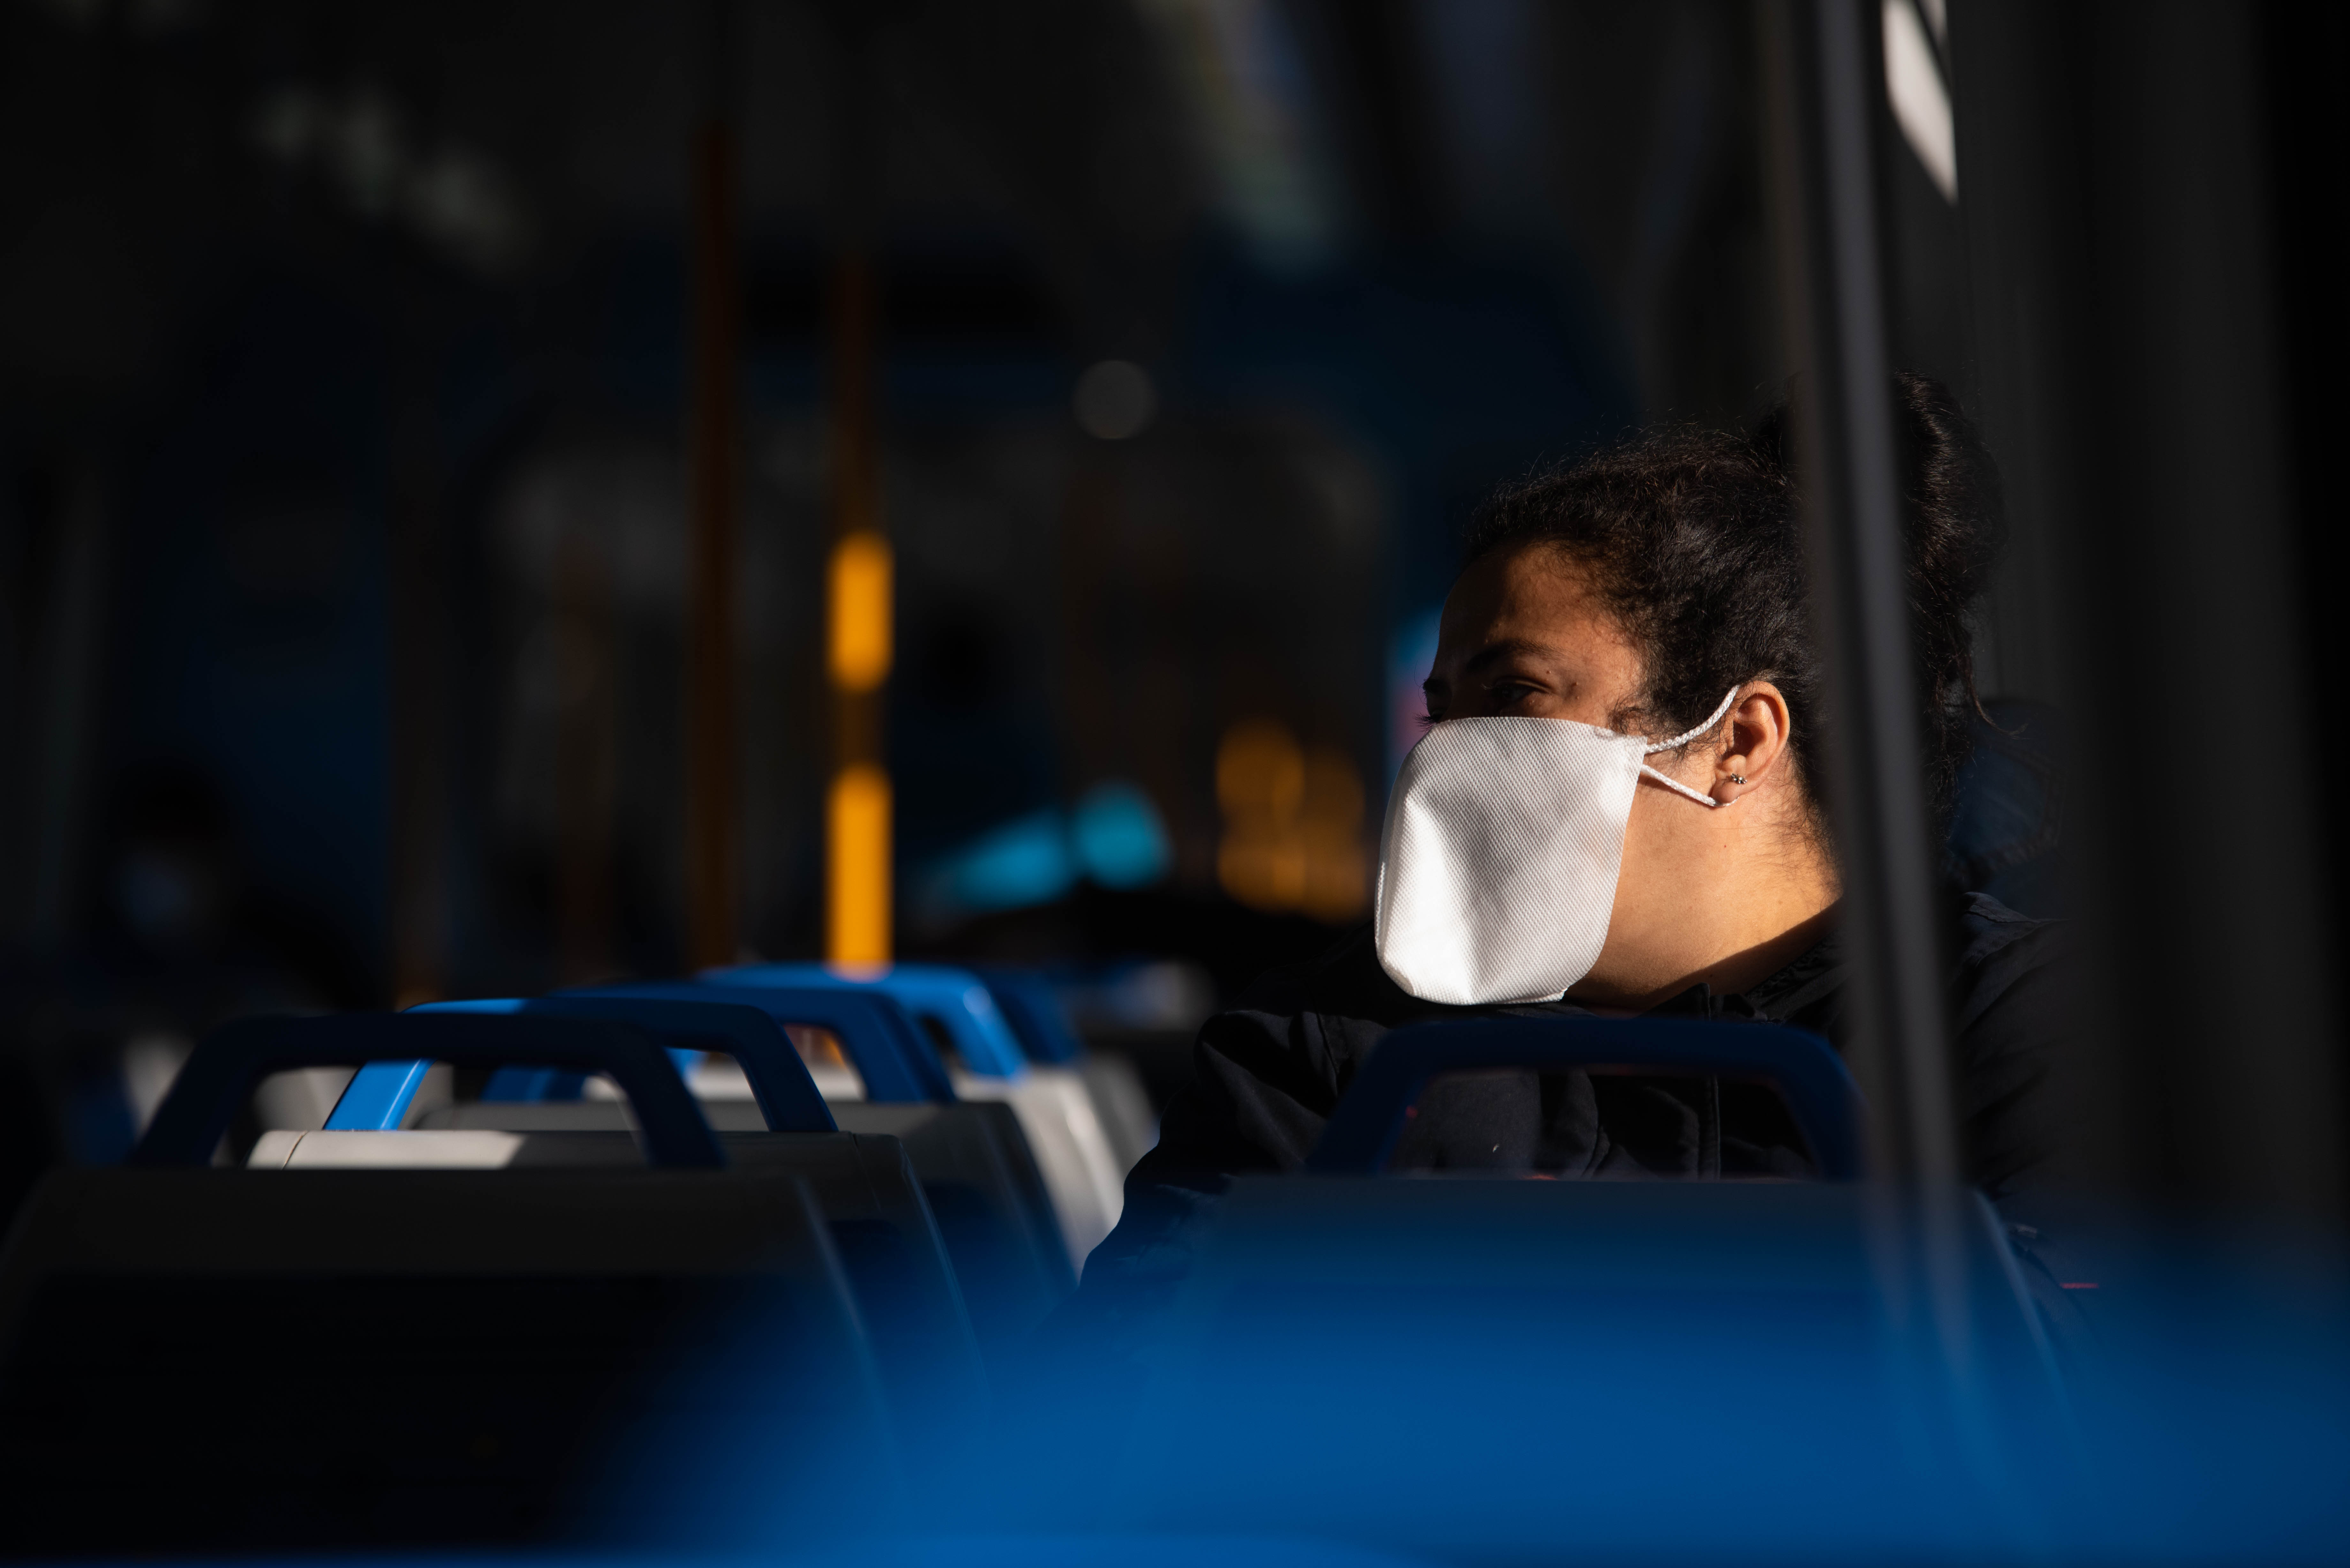 The end of the mandatory mask in closed spaces and public transport was a step that would come over time, experts say